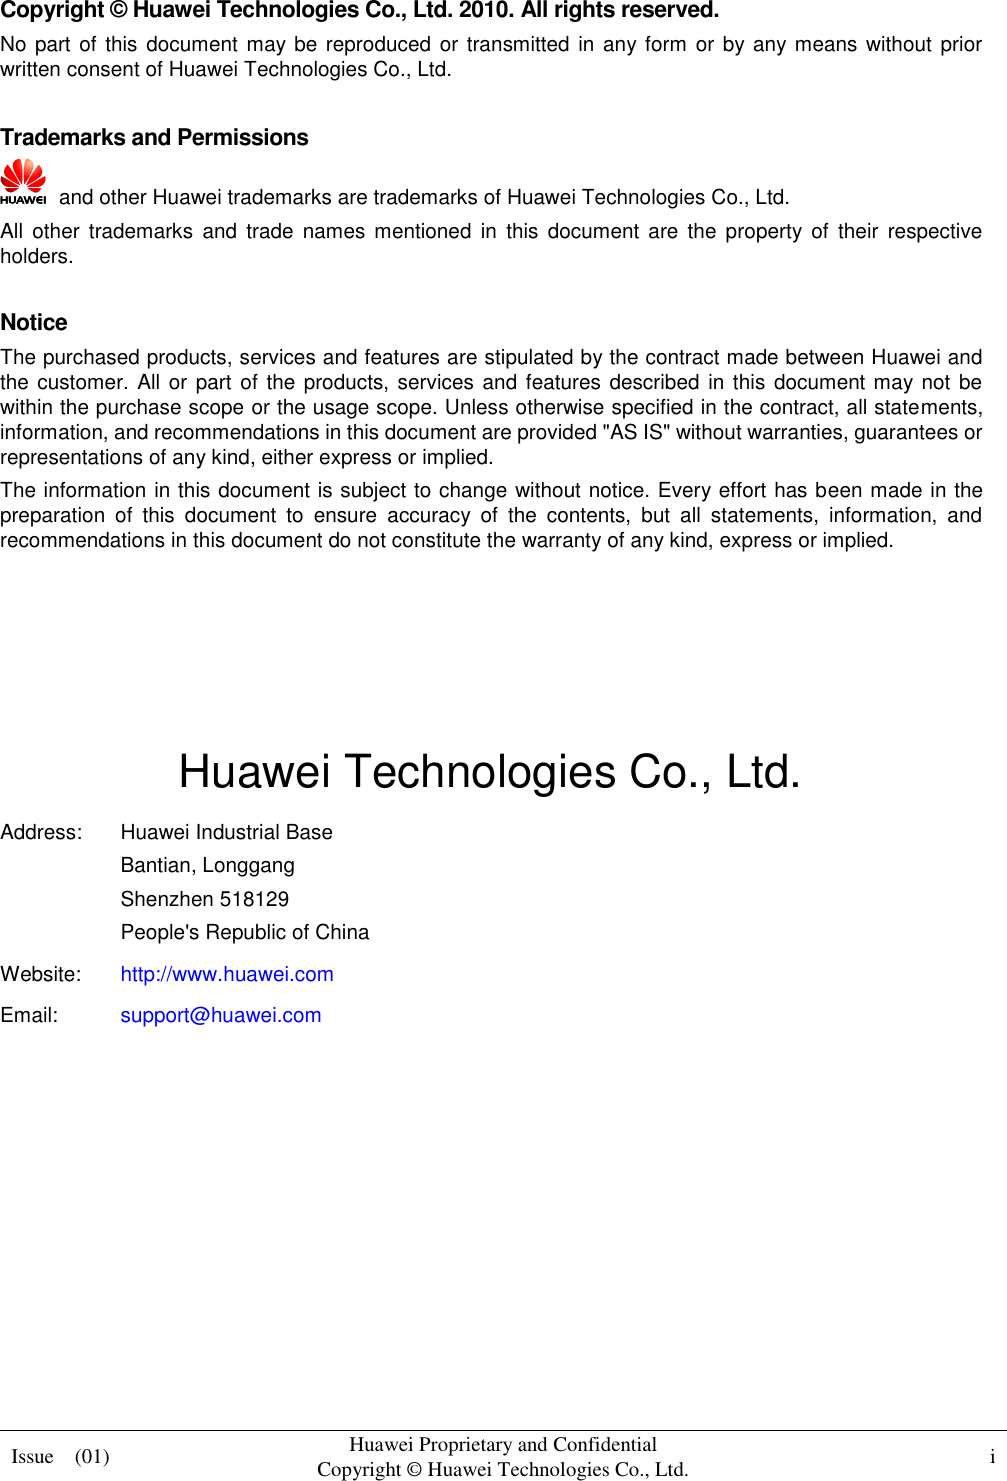  Issue    (01) Huawei Proprietary and Confidential                                     Copyright © Huawei Technologies Co., Ltd. i    Copyright © Huawei Technologies Co., Ltd. 2010. All rights reserved. No part of this  document  may be reproduced or transmitted in any form or by any means without prior written consent of Huawei Technologies Co., Ltd.  Trademarks and Permissions   and other Huawei trademarks are trademarks of Huawei Technologies Co., Ltd. All  other  trademarks  and  trade  names mentioned  in  this  document  are  the  property  of  their  respective holders.  Notice The purchased products, services and features are stipulated by the contract made between Huawei and the customer.  All or part of the products, services and features described  in this document may not be within the purchase scope or the usage scope. Unless otherwise specified in the contract, all statements, information, and recommendations in this document are provided &quot;AS IS&quot; without warranties, guarantees or representations of any kind, either express or implied. The information in this document is subject to change without notice. Every effort has been made in the preparation  of  this  document  to  ensure  accuracy  of  the  contents,  but  all  statements,  information,  and recommendations in this document do not constitute the warranty of any kind, express or implied.     Huawei Technologies Co., Ltd. Address: Huawei Industrial Base Bantian, Longgang Shenzhen 518129 People&apos;s Republic of China Website: http://www.huawei.com Email: support@huawei.com          